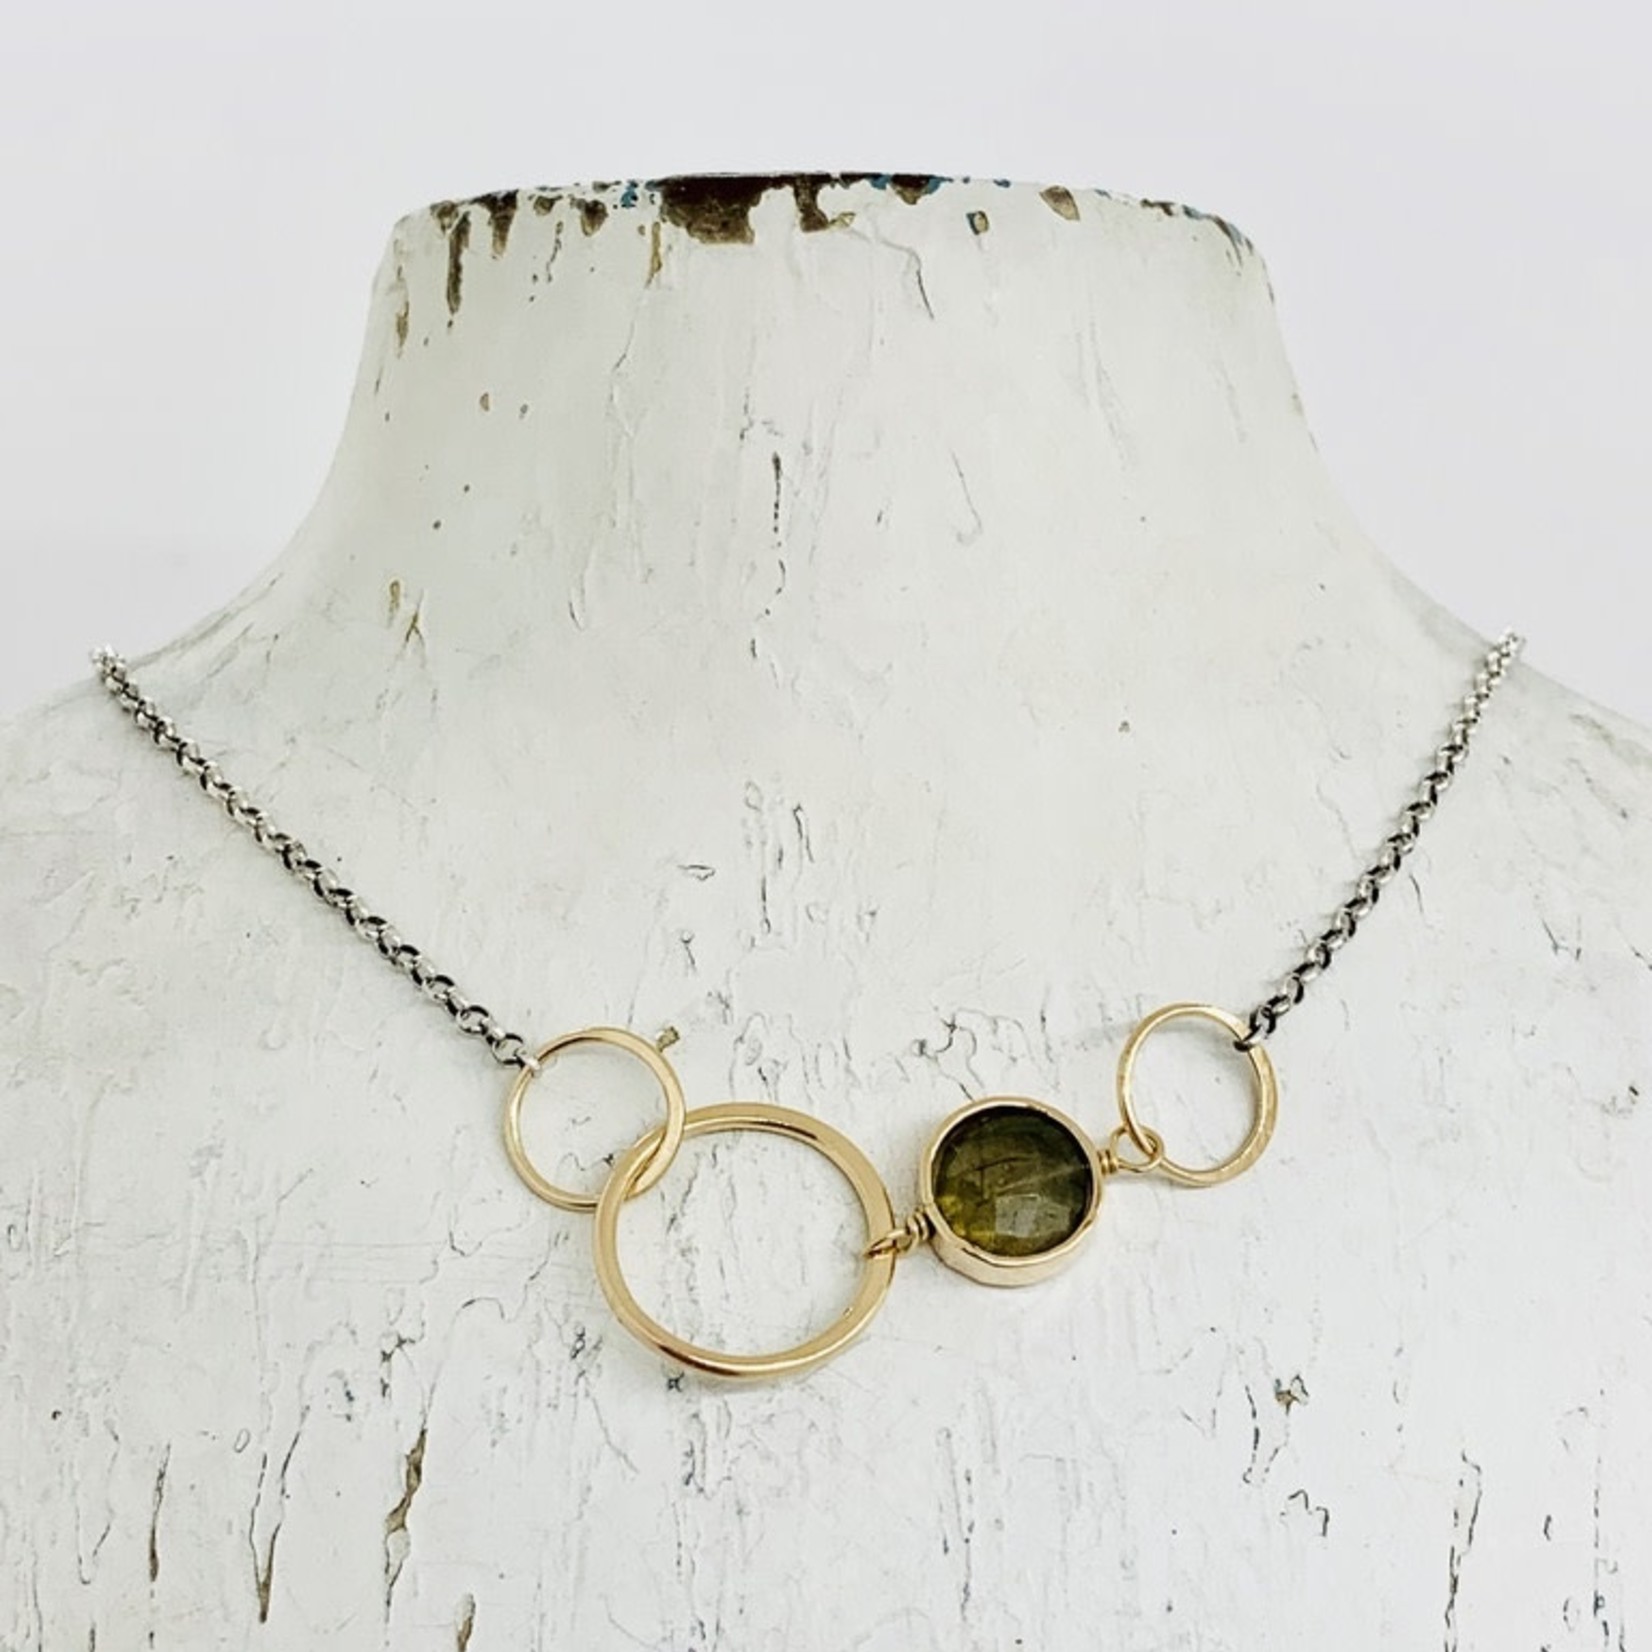 Handmade 8mm Faceted Labradorite Coin in 14kt Gold filled Link on Sterling Chain Necklace